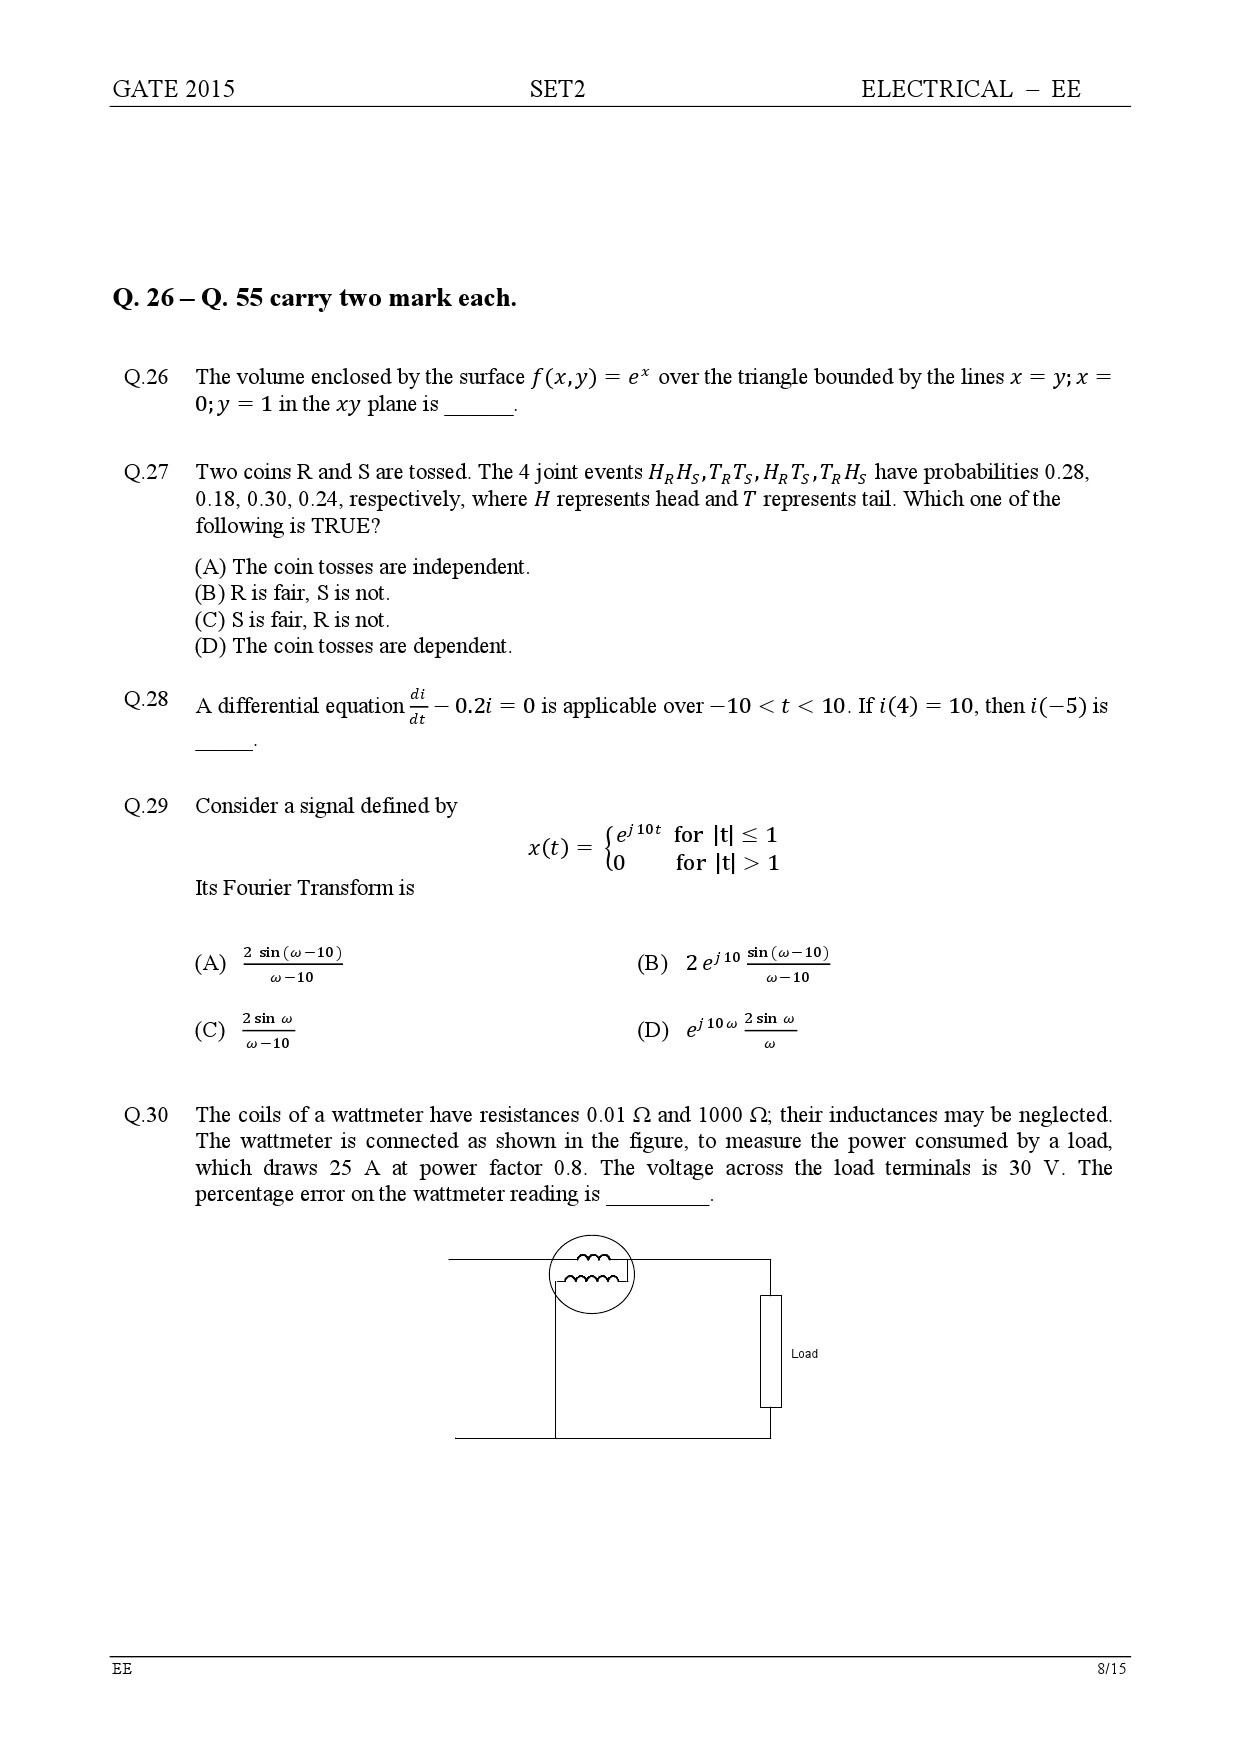 GATE Exam Question Paper 2015 Electrical Engineering Set 2 8